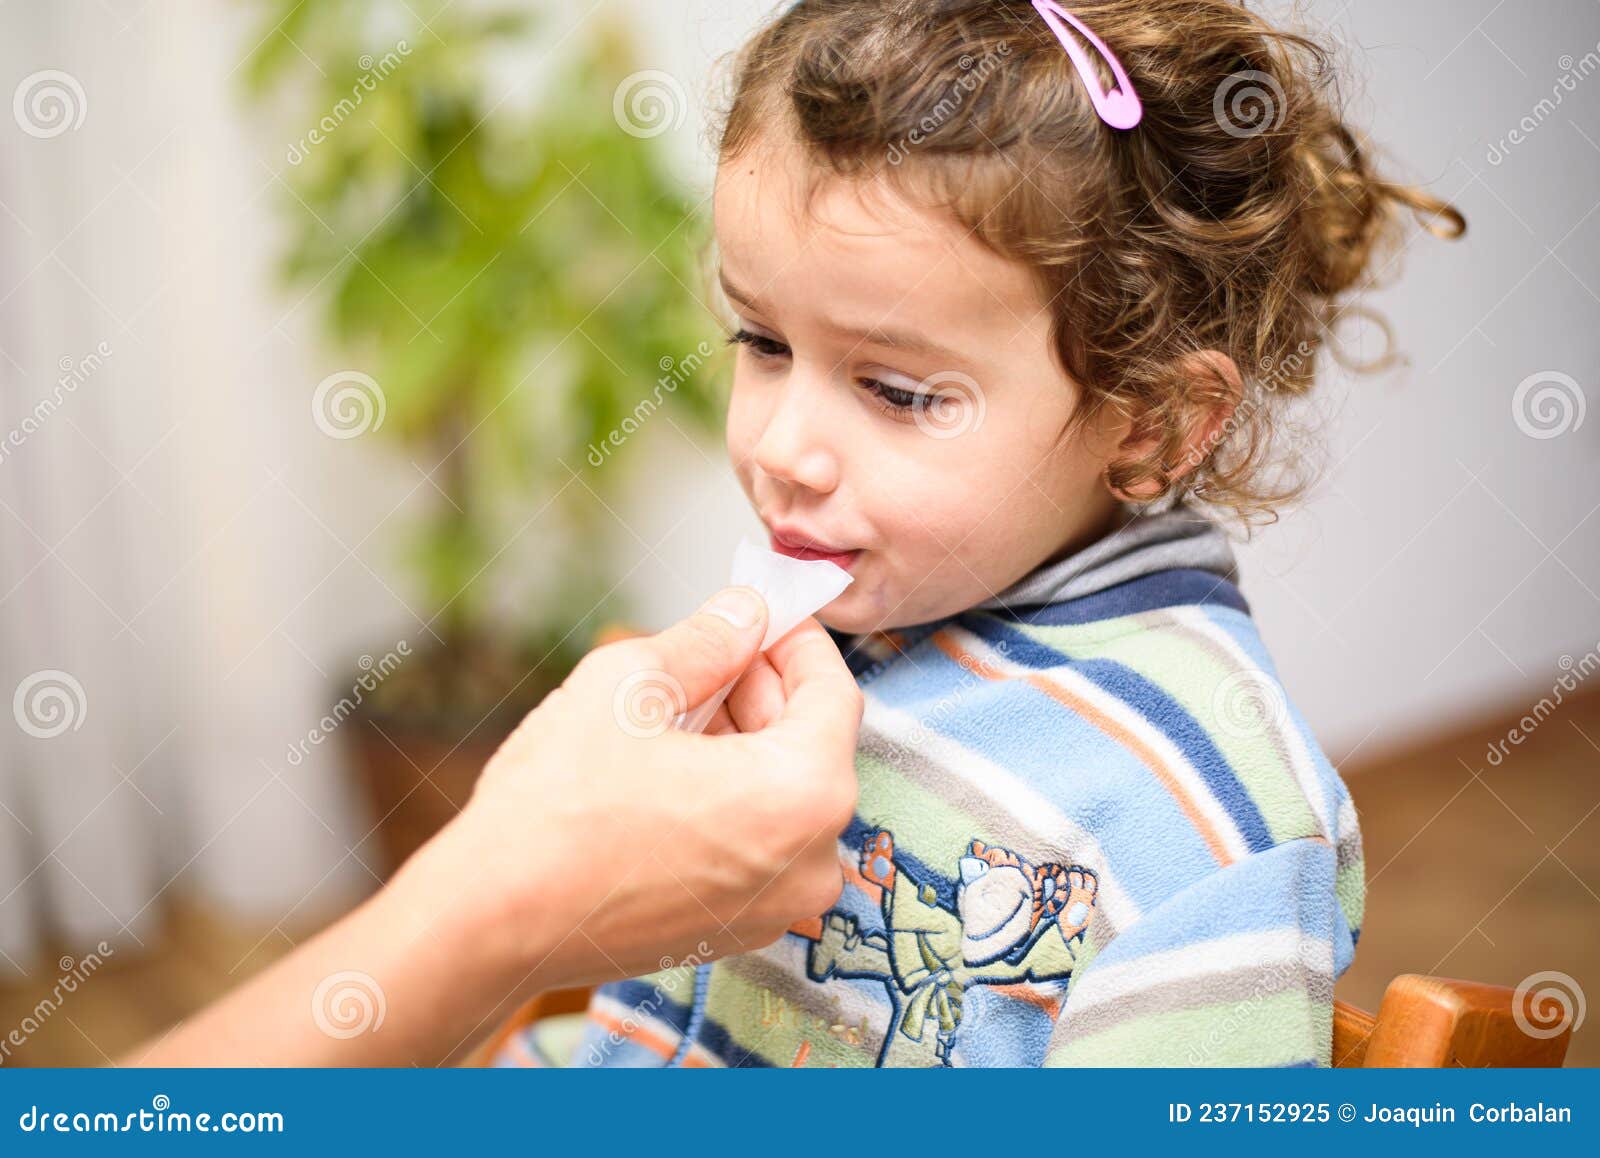 a three-year-old girl spits into a saliva test tube for covid19 antigens